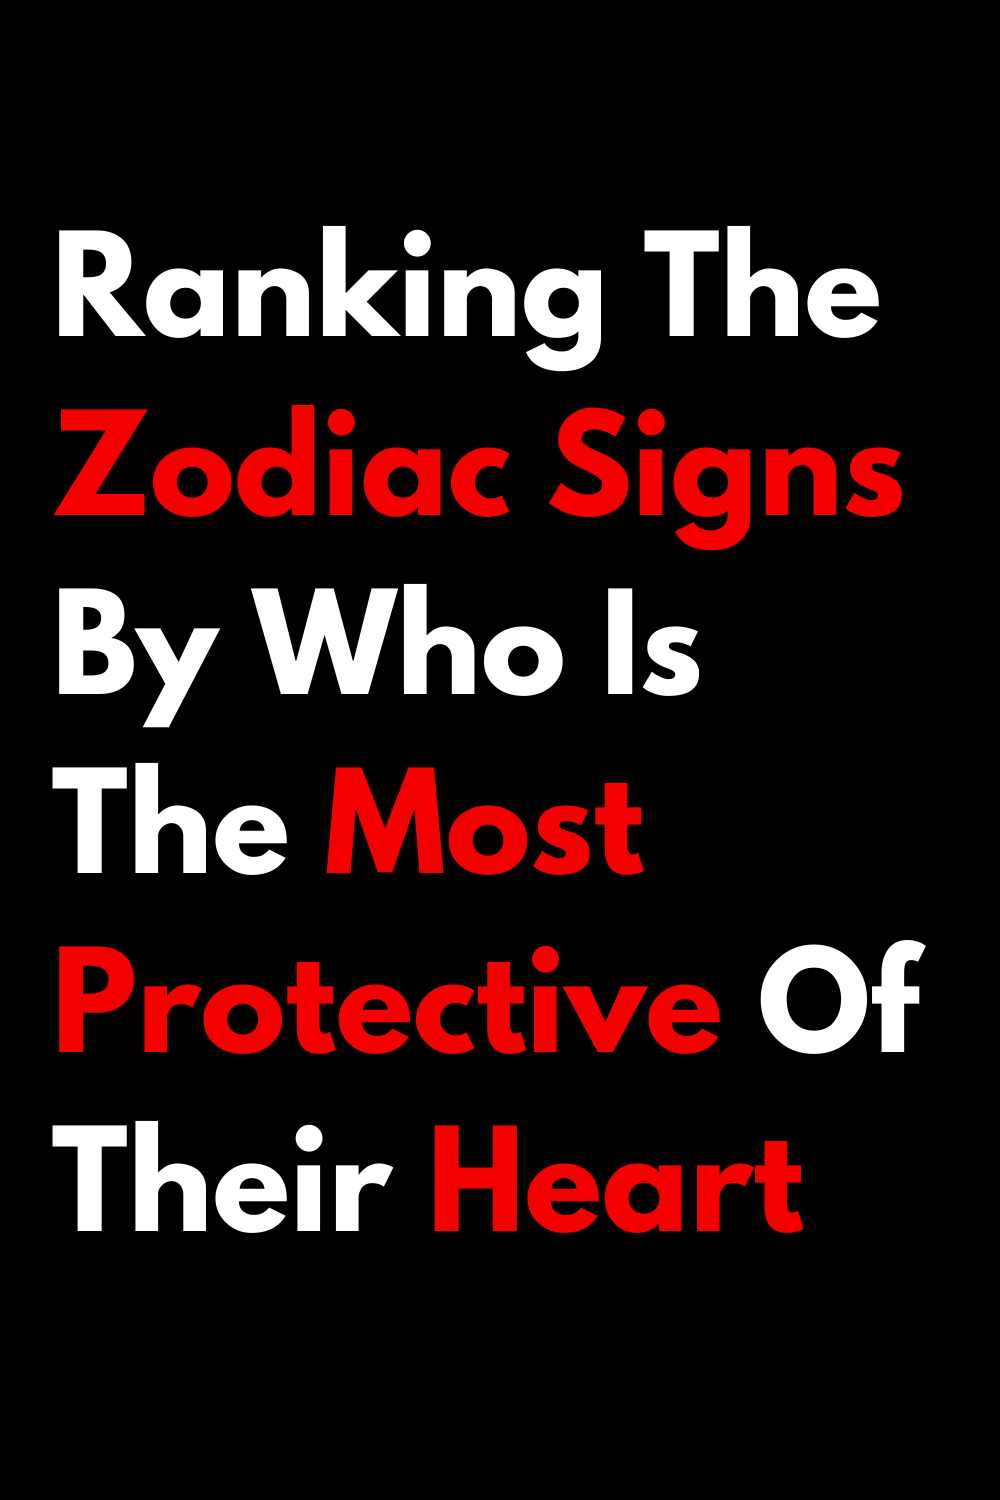 Ranking The Zodiac Signs By Who Is The Most Protective Of Their Heart